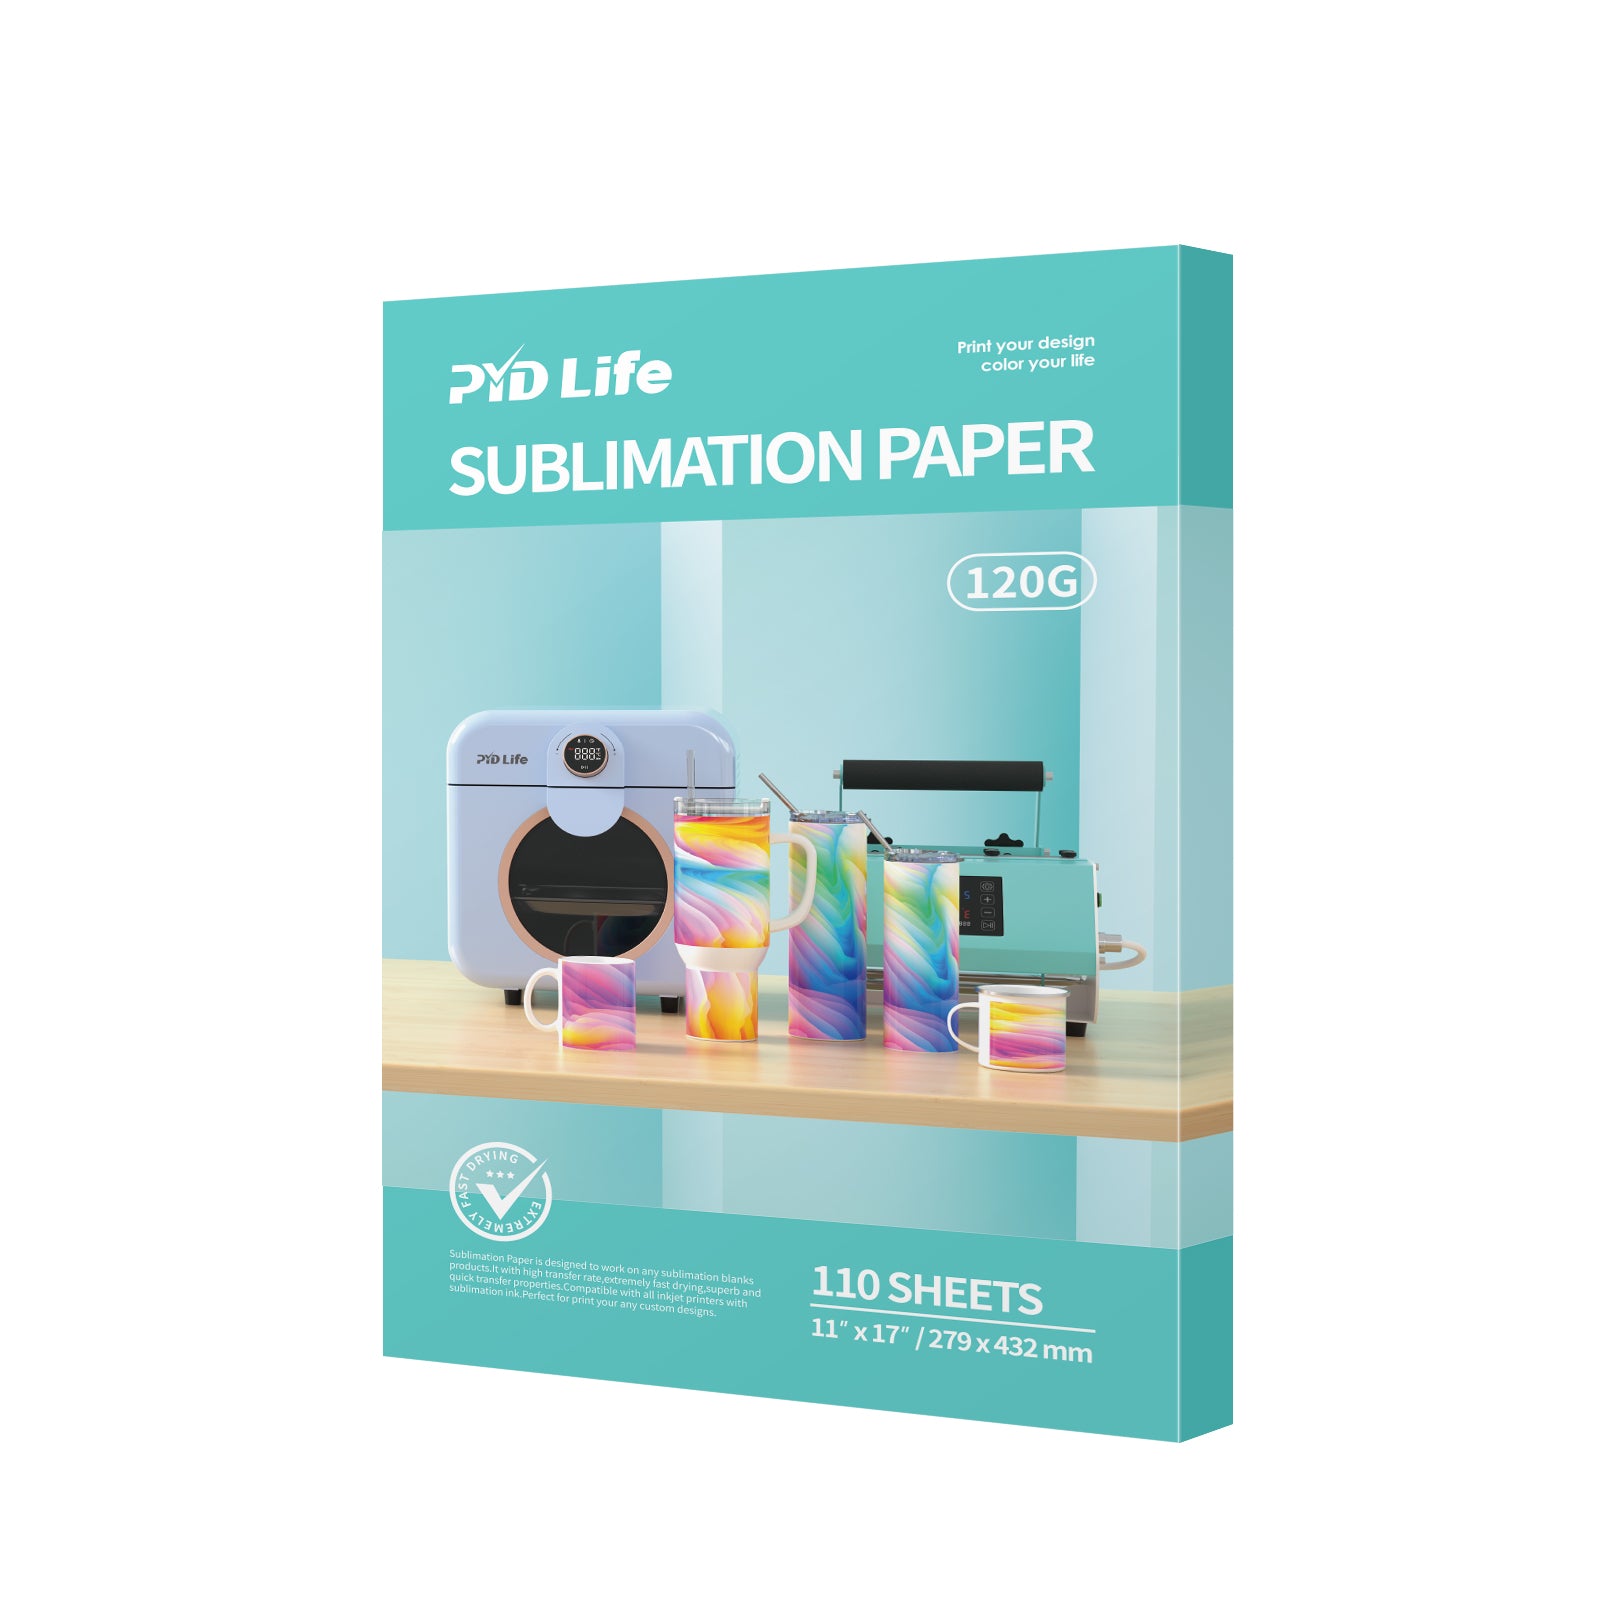 Opti-Trans DS - Dye Sublimation Paper (11x17) - Transfer Paper Canada